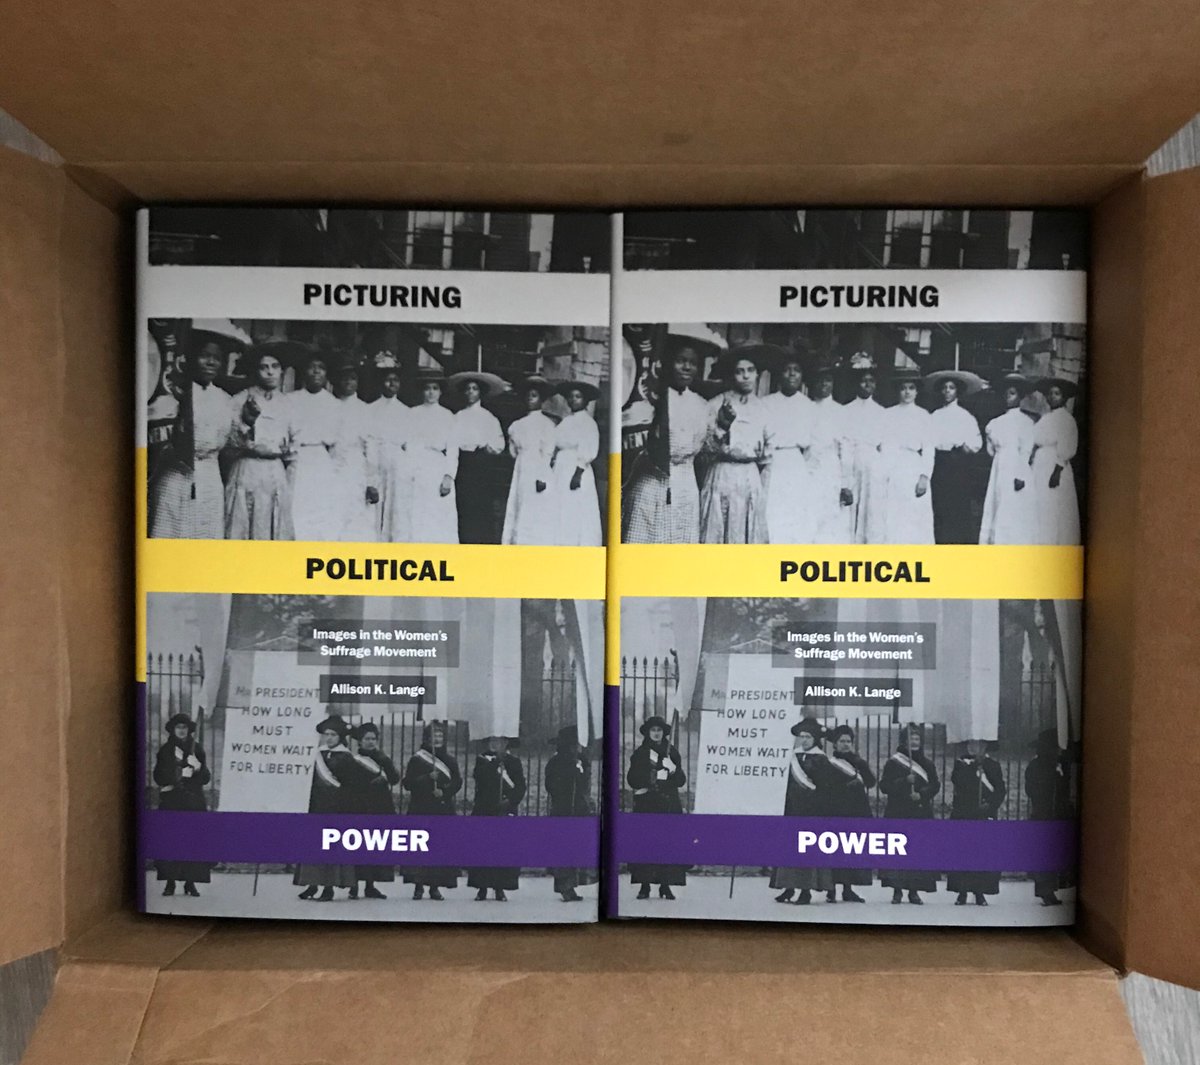 This weekend I received the first copies of my book from @UChicagoPress! I’ve been excited about this moment for a long time and the book looks even better than I could have imagined! #newbook #tbr #history #twitterstorians #womenshistory #19thAmendment #19that100 #votesforwomen